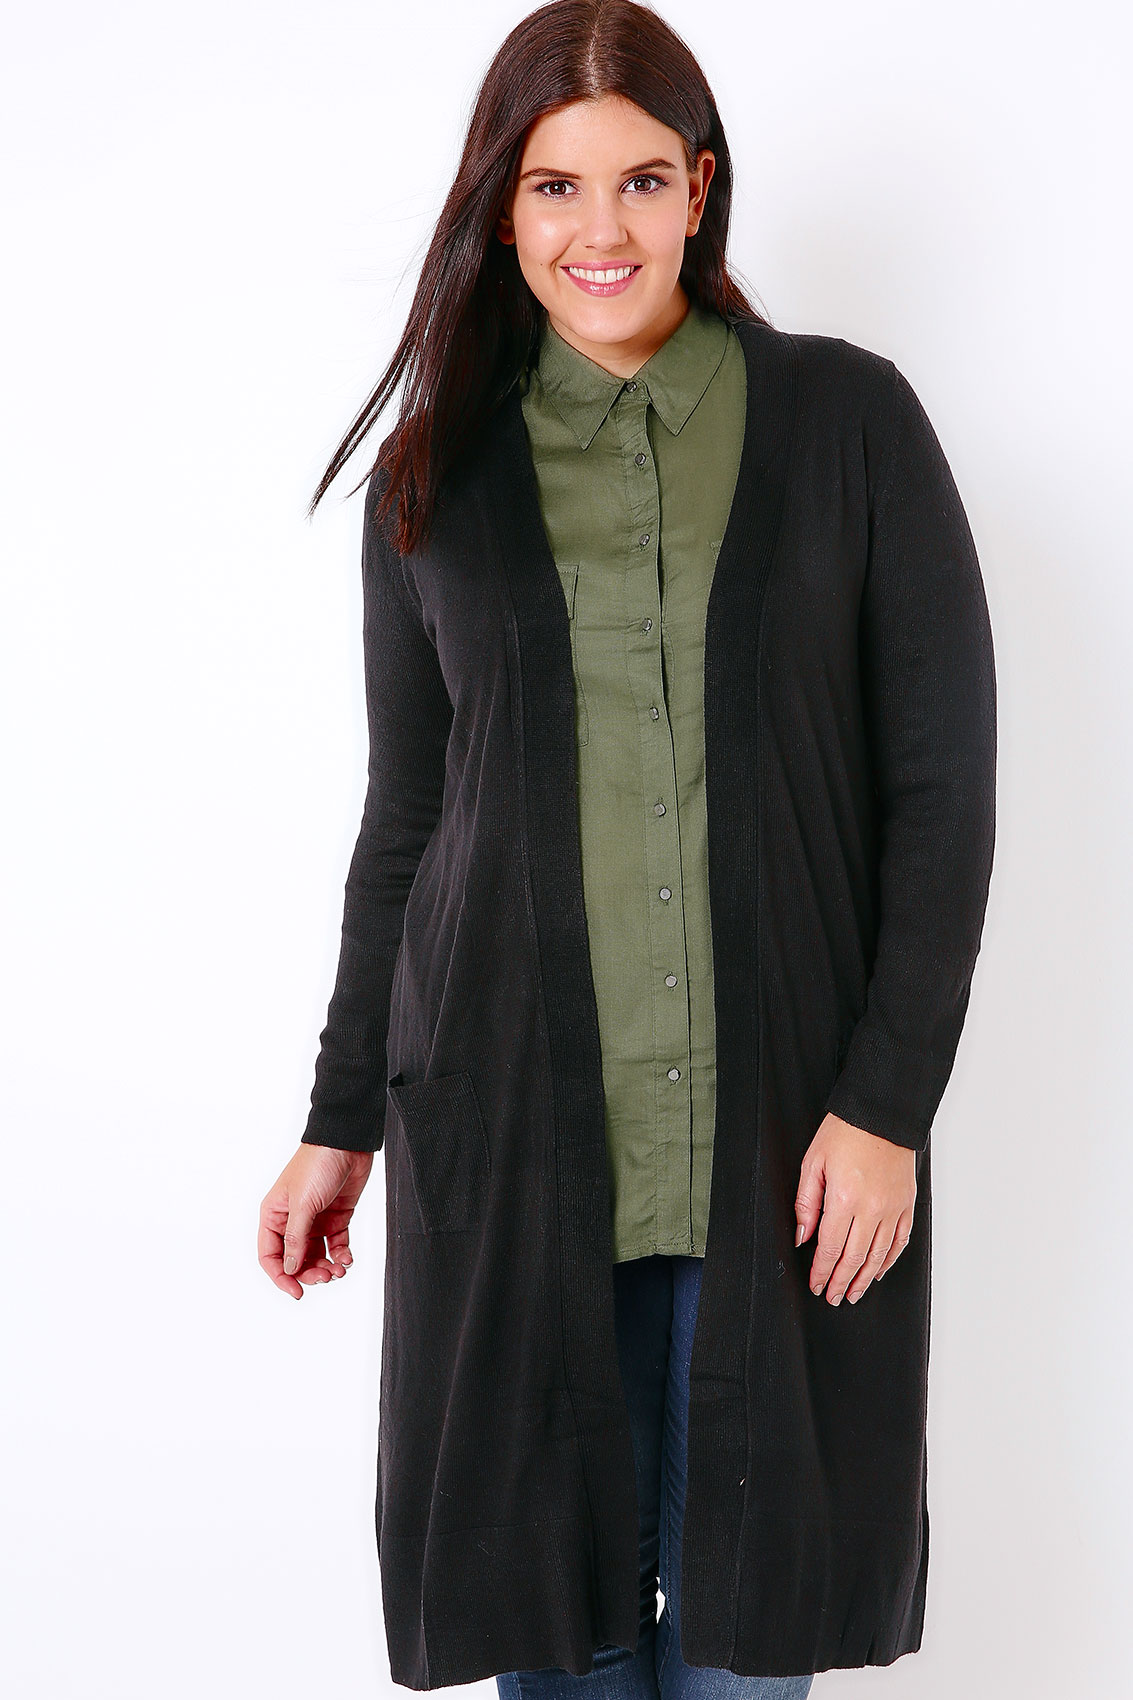 Black Maxi Knit Cardigan With Pockets Plus Size 16 to 36